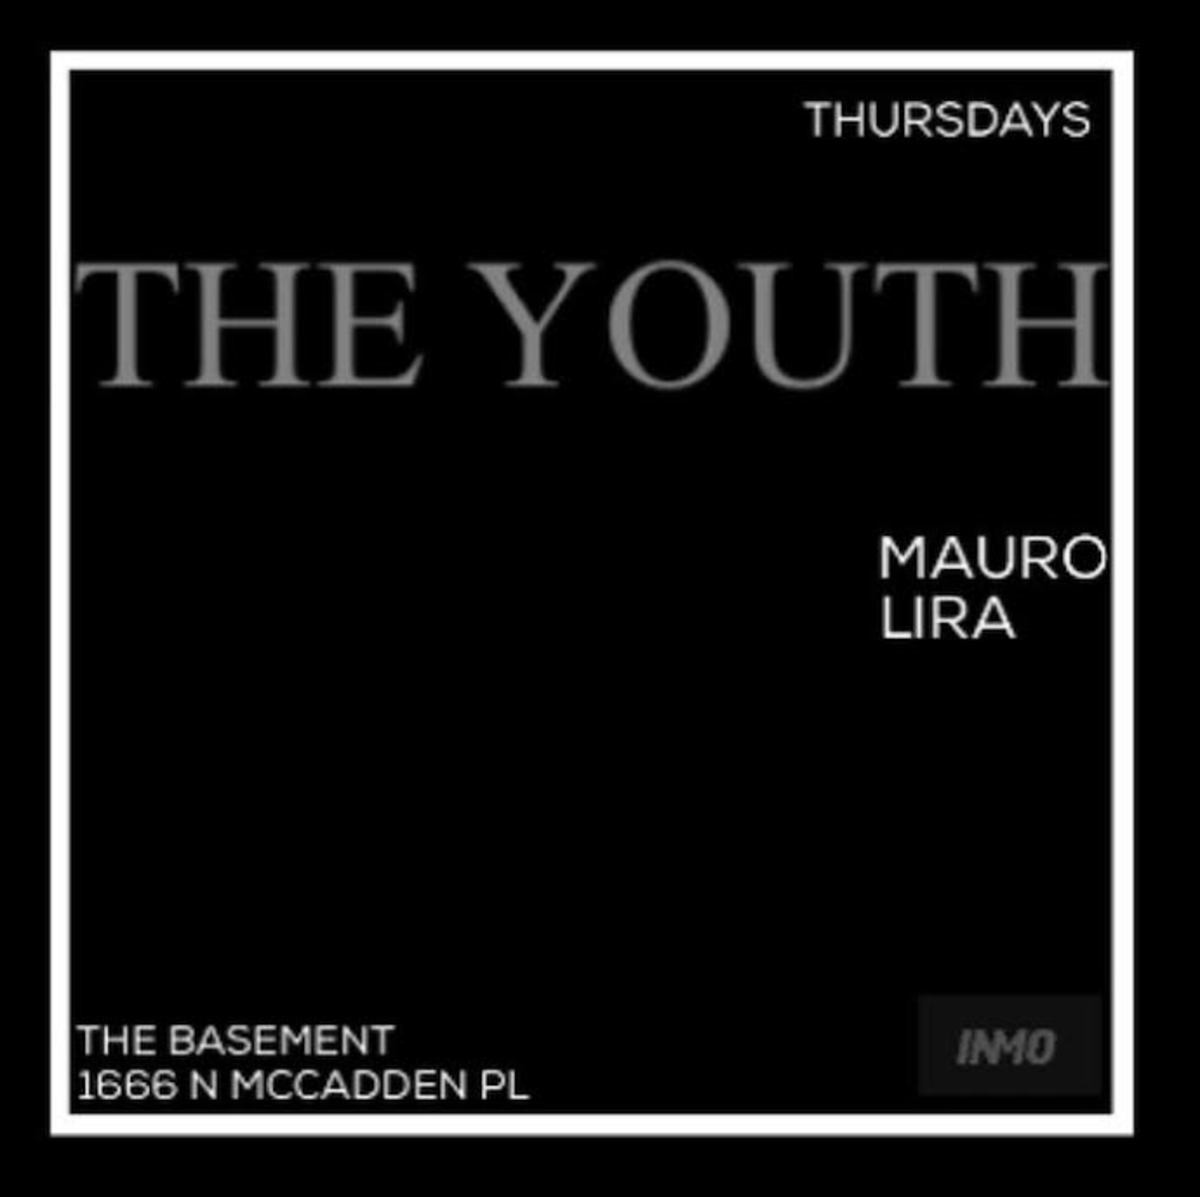 TheYouth